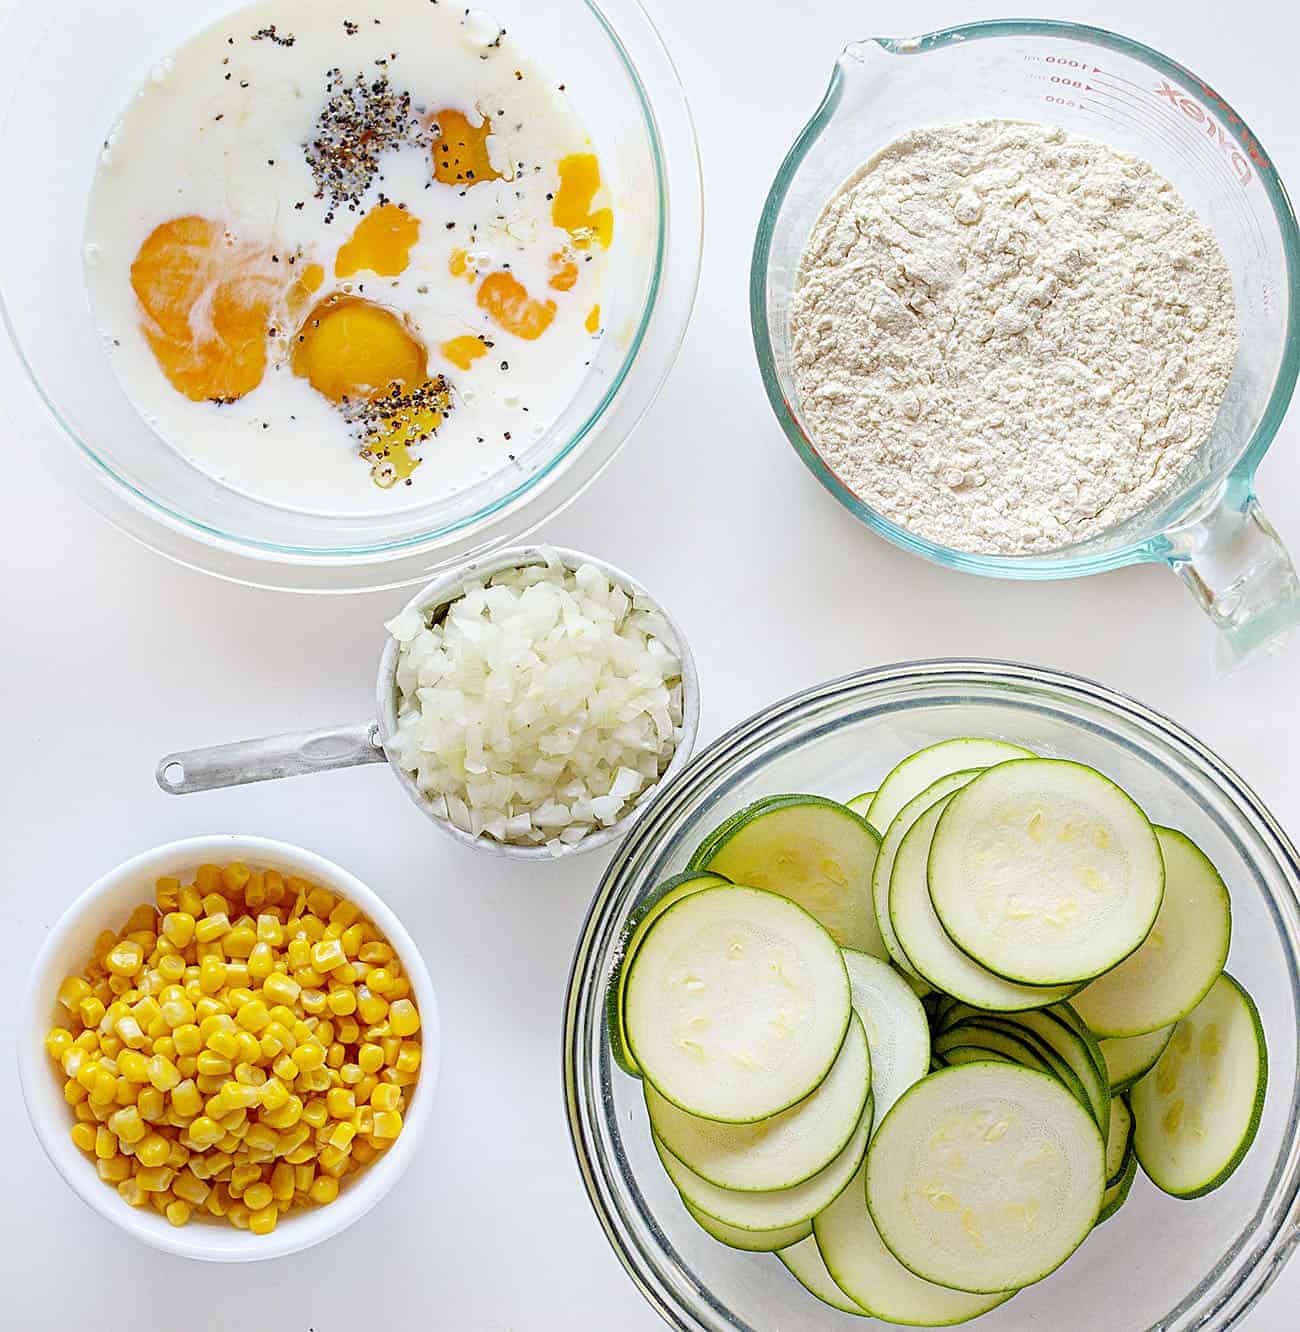 Ingredients for Zucchini and Corn Quiche